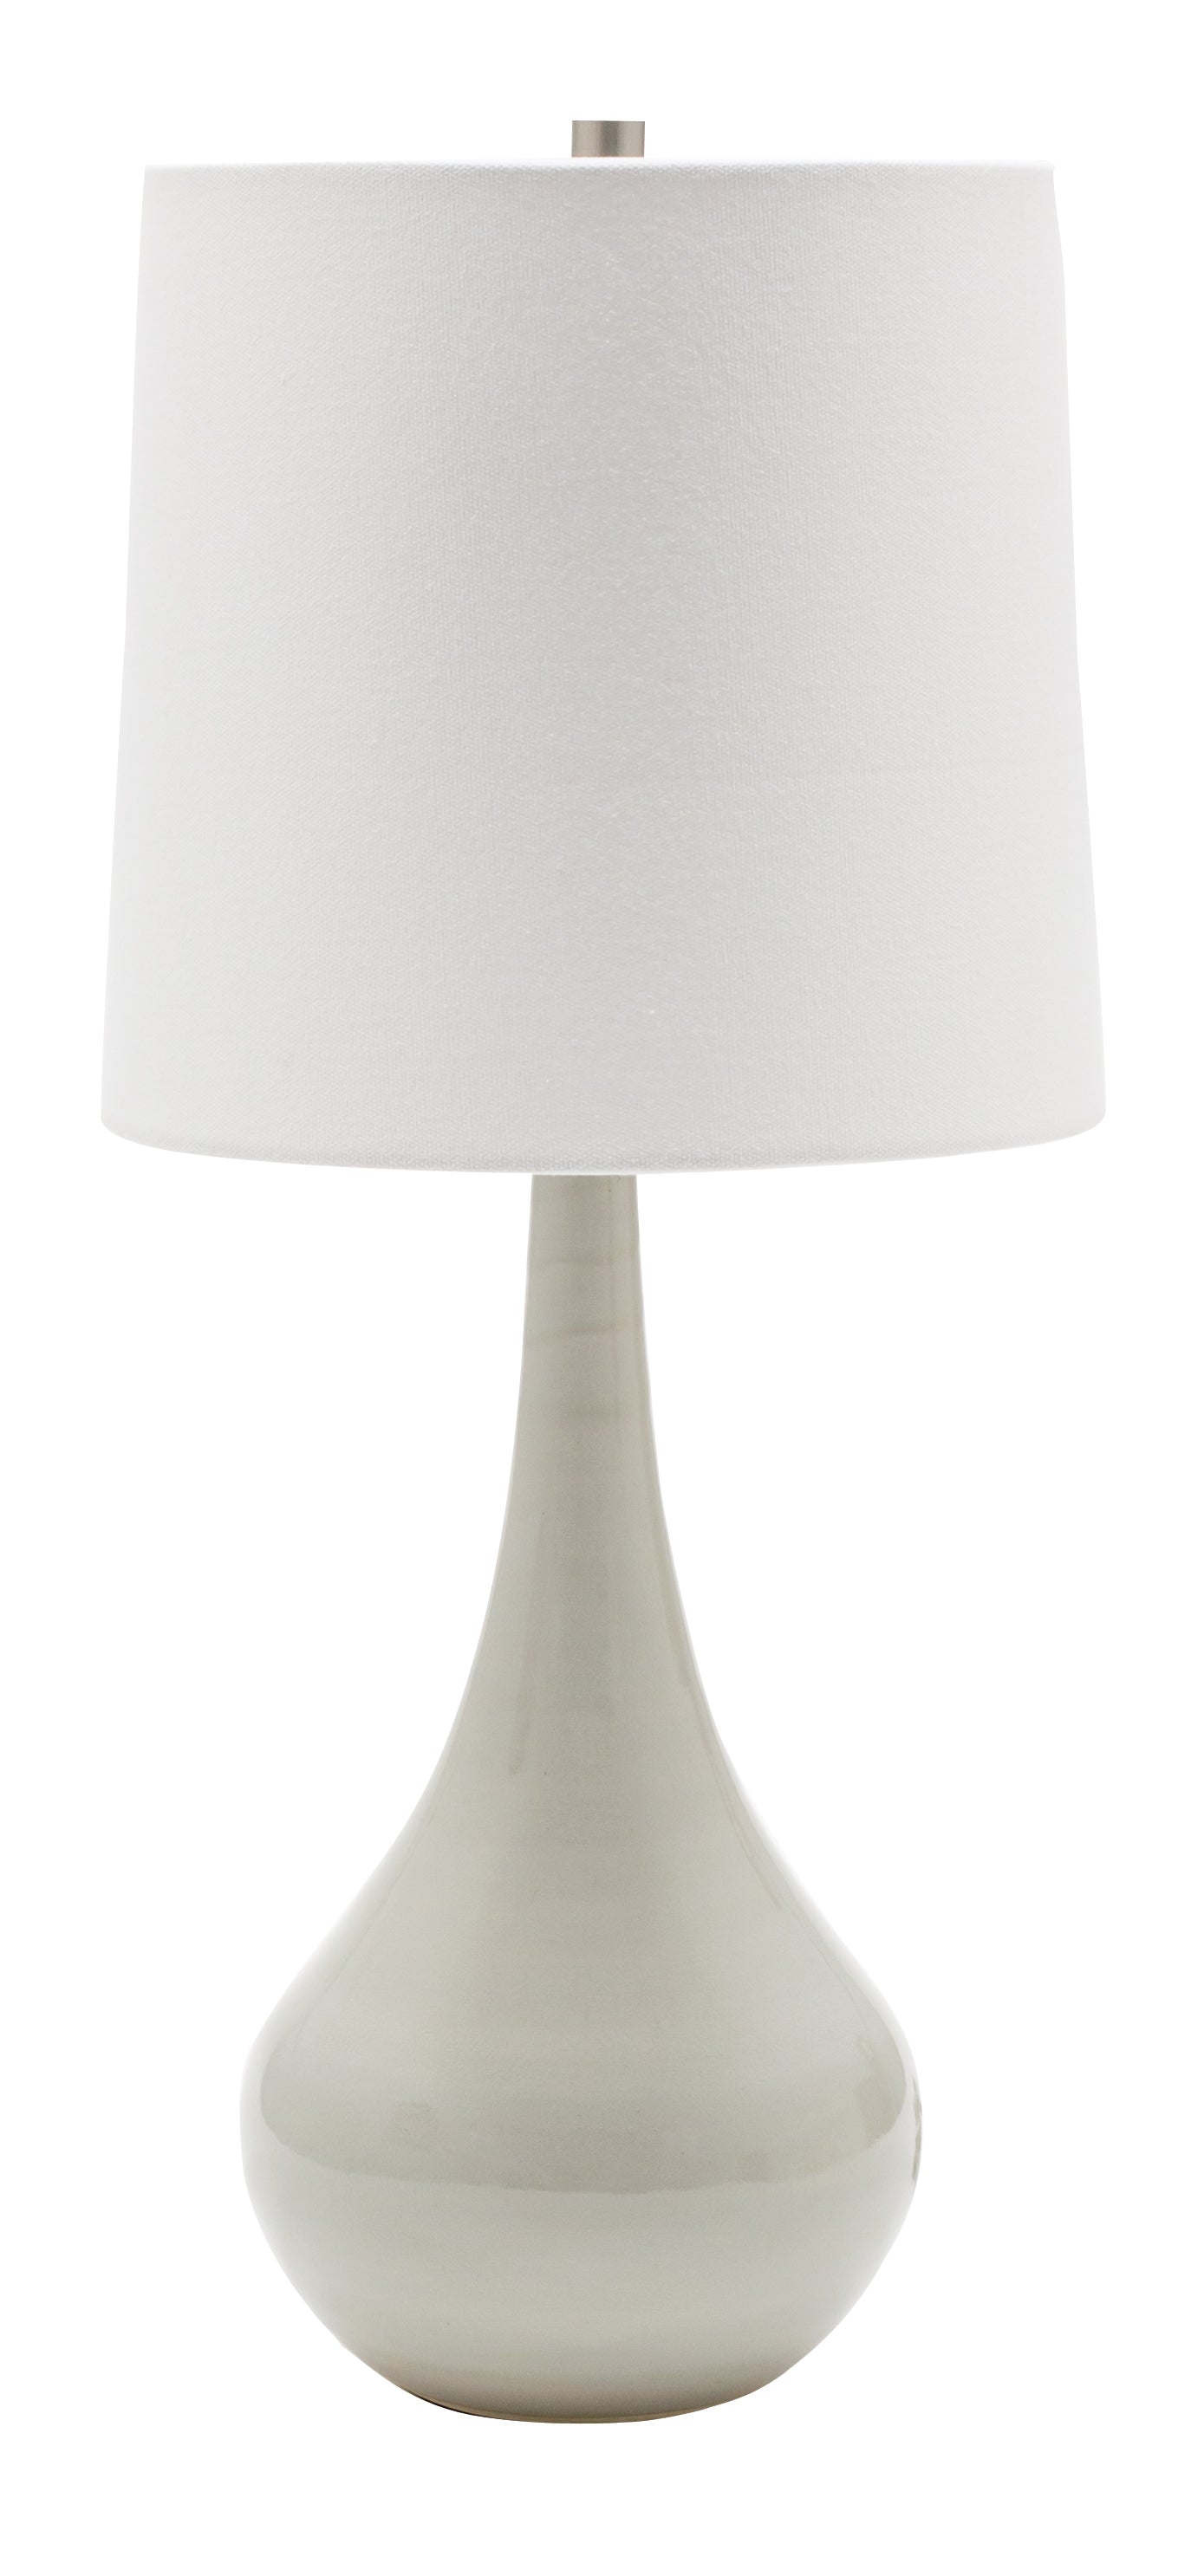 House of Troy Scatchard 22.5" Stoneware Table Lamp in Gray Gloss GS180-GG